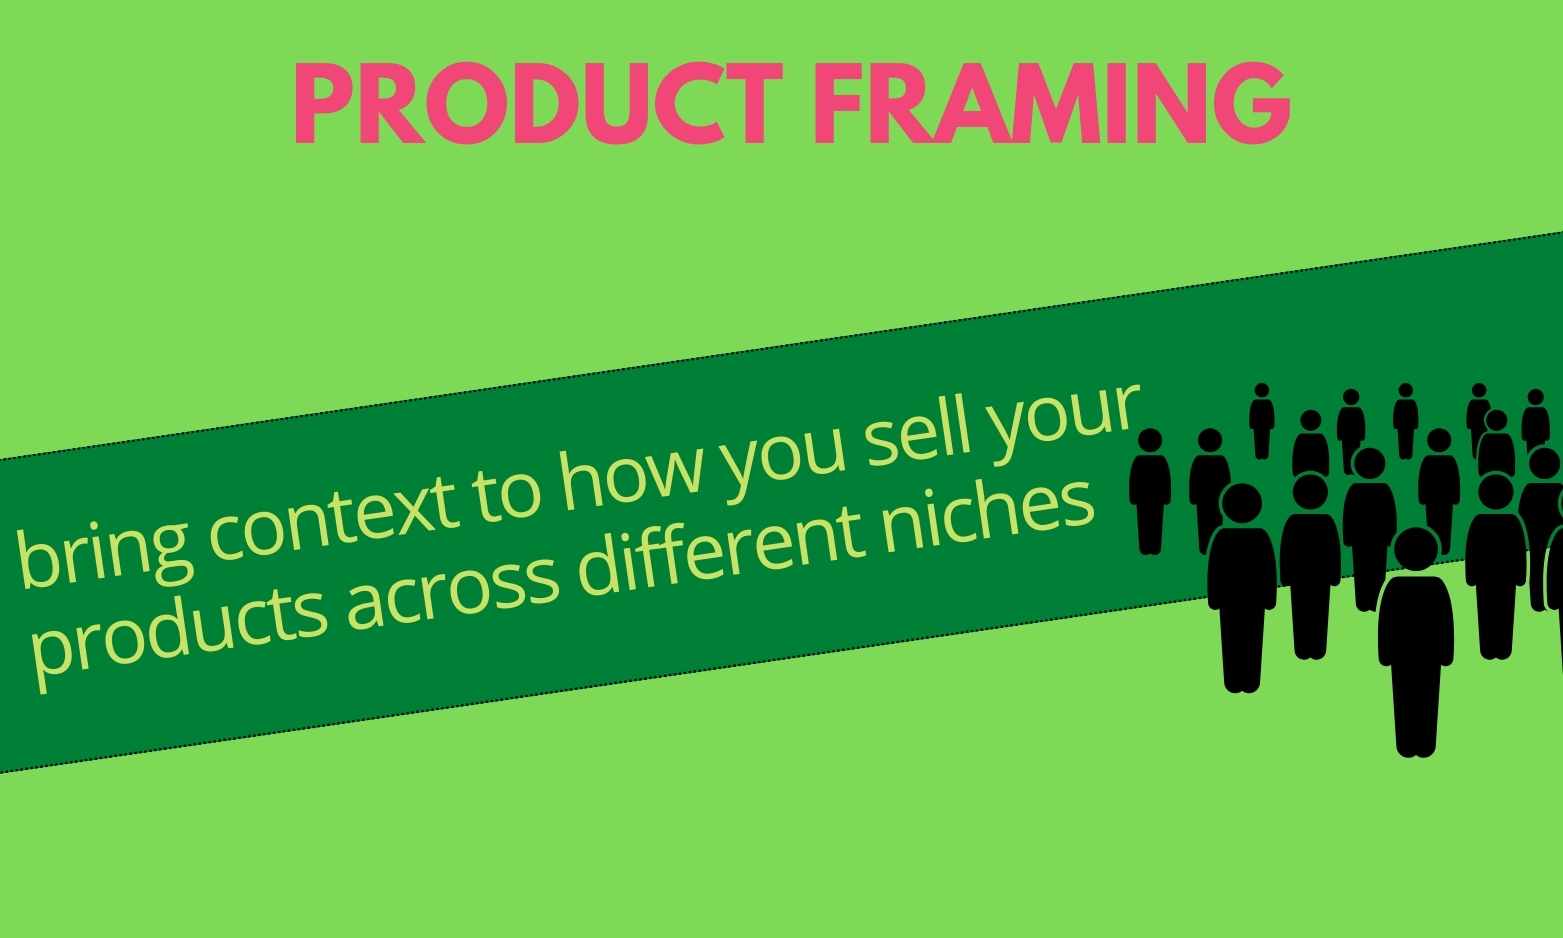 Featured image for “Product Framing: How to Sell Your Products Across Multiple Niches”